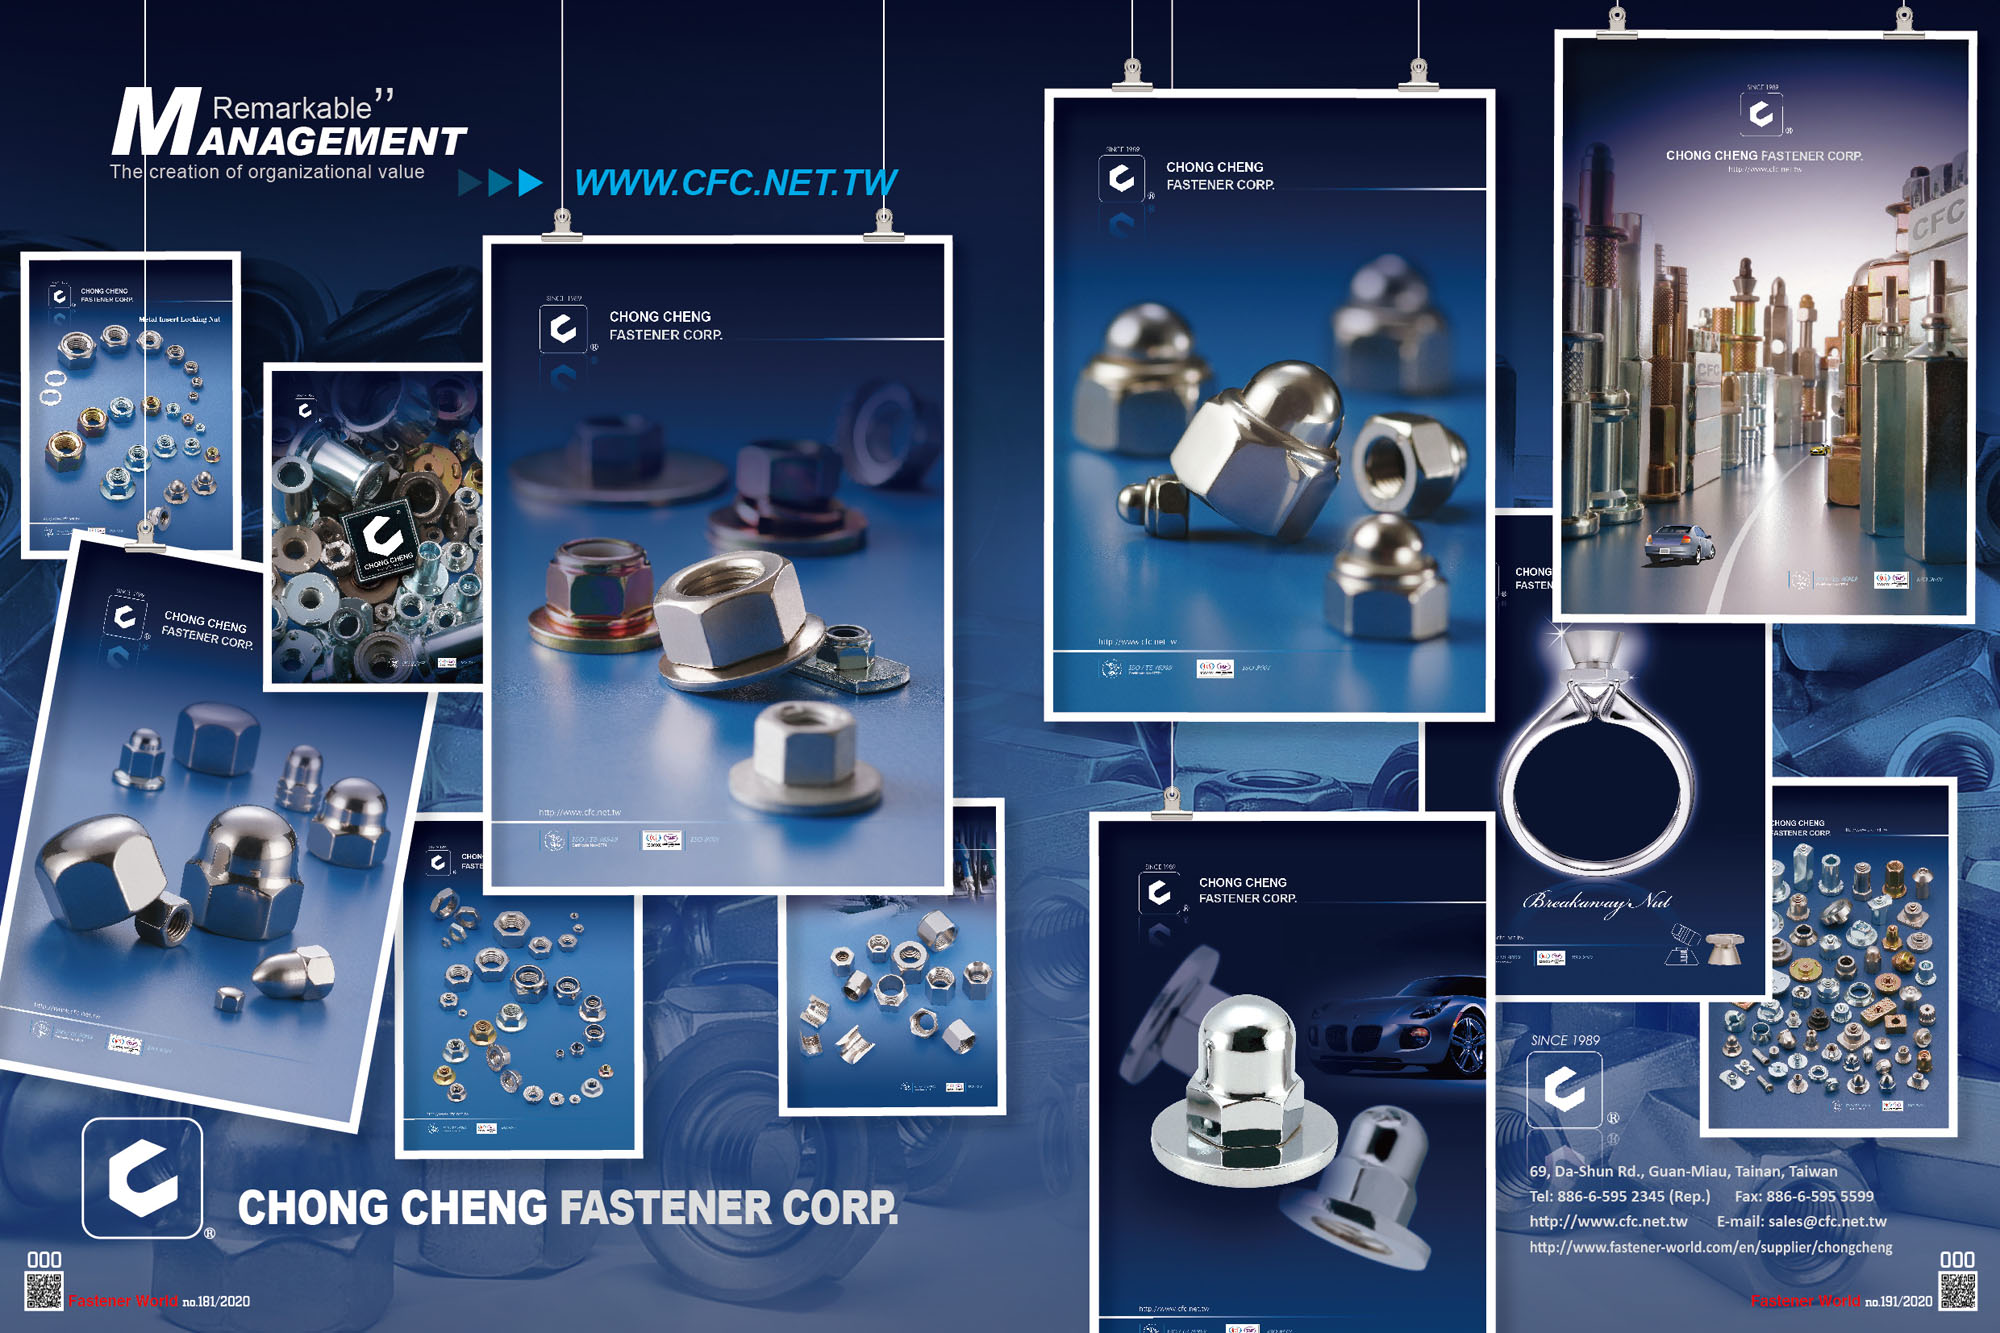 CHONG CHENG FASTENER CORP. (CFC) , Hex Nut with Flat & Conical Washer, Flange Nylon Insert Lock Nut, HEX NUT WITH SPECIAL WASHER, CONICAL SPRING WASHER NUT, CONICAL WASHER NUT, NYLON INSERT NUT WITH WASHER, SPECIAL CONICAL WASHER NUT, DIN 1587, DIN934, DIN982, DIN 985, DIN 986, DIN 917, DIN 562, DIN557, DIN929, DIN928, DIN439, DIN 6923, DIN 6926, DIN6334, DIN980, DIN980V All Metal prevailing Torque, DIN6330, HEX FLANGE CAP NUT, FIN HEX NUT, HEX NYLON INSERT LOCK NUT (NE/NM), HEX THIN NYLON INSERT LOCK NUT (NTE/NTM), HEX FLANGE NUT (SERRATION/ WITHOUT SERRATION), HEX KEPS NUT, ACORN CAP NUT, SQUARE NUT, HEX SLOTTED NUT, HEX JAM  , Acorn Nuts